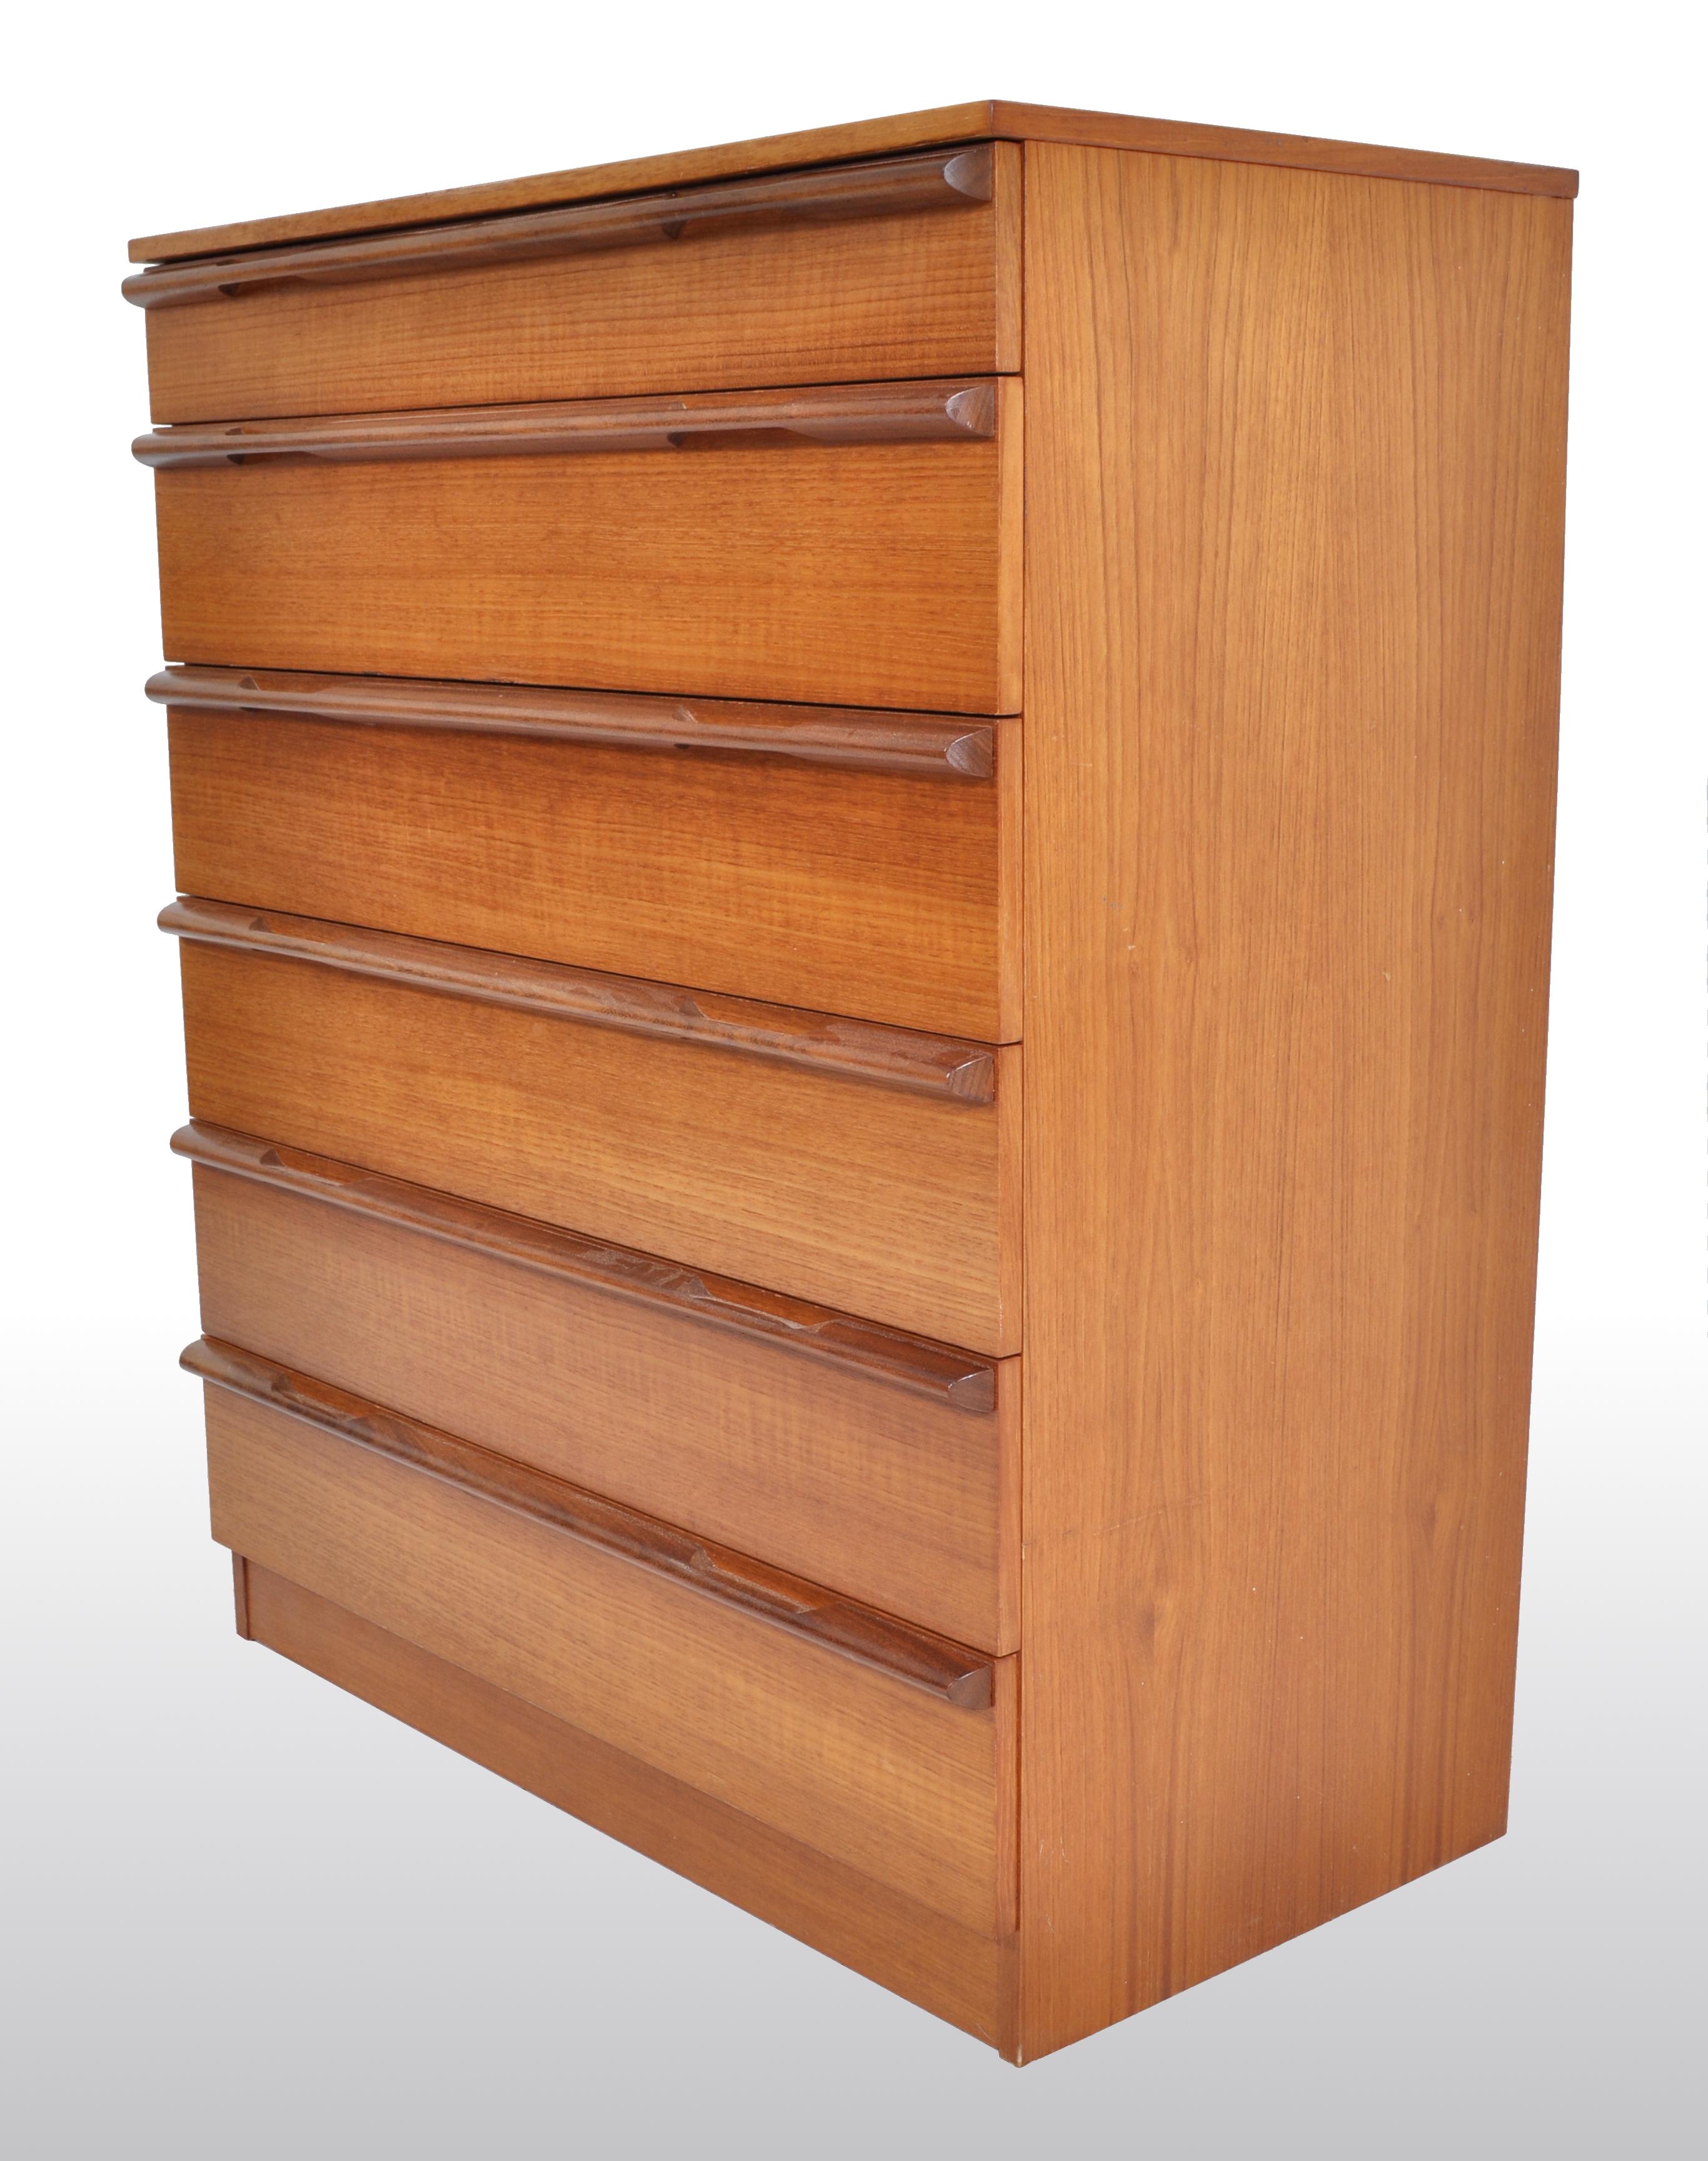 Mid-Century Modern Danish chest of drawers / dresser in teak, 1960s. The dresser having six drawers, each with a linear handle running the length of the drawer, the chest raised on a plinth base.